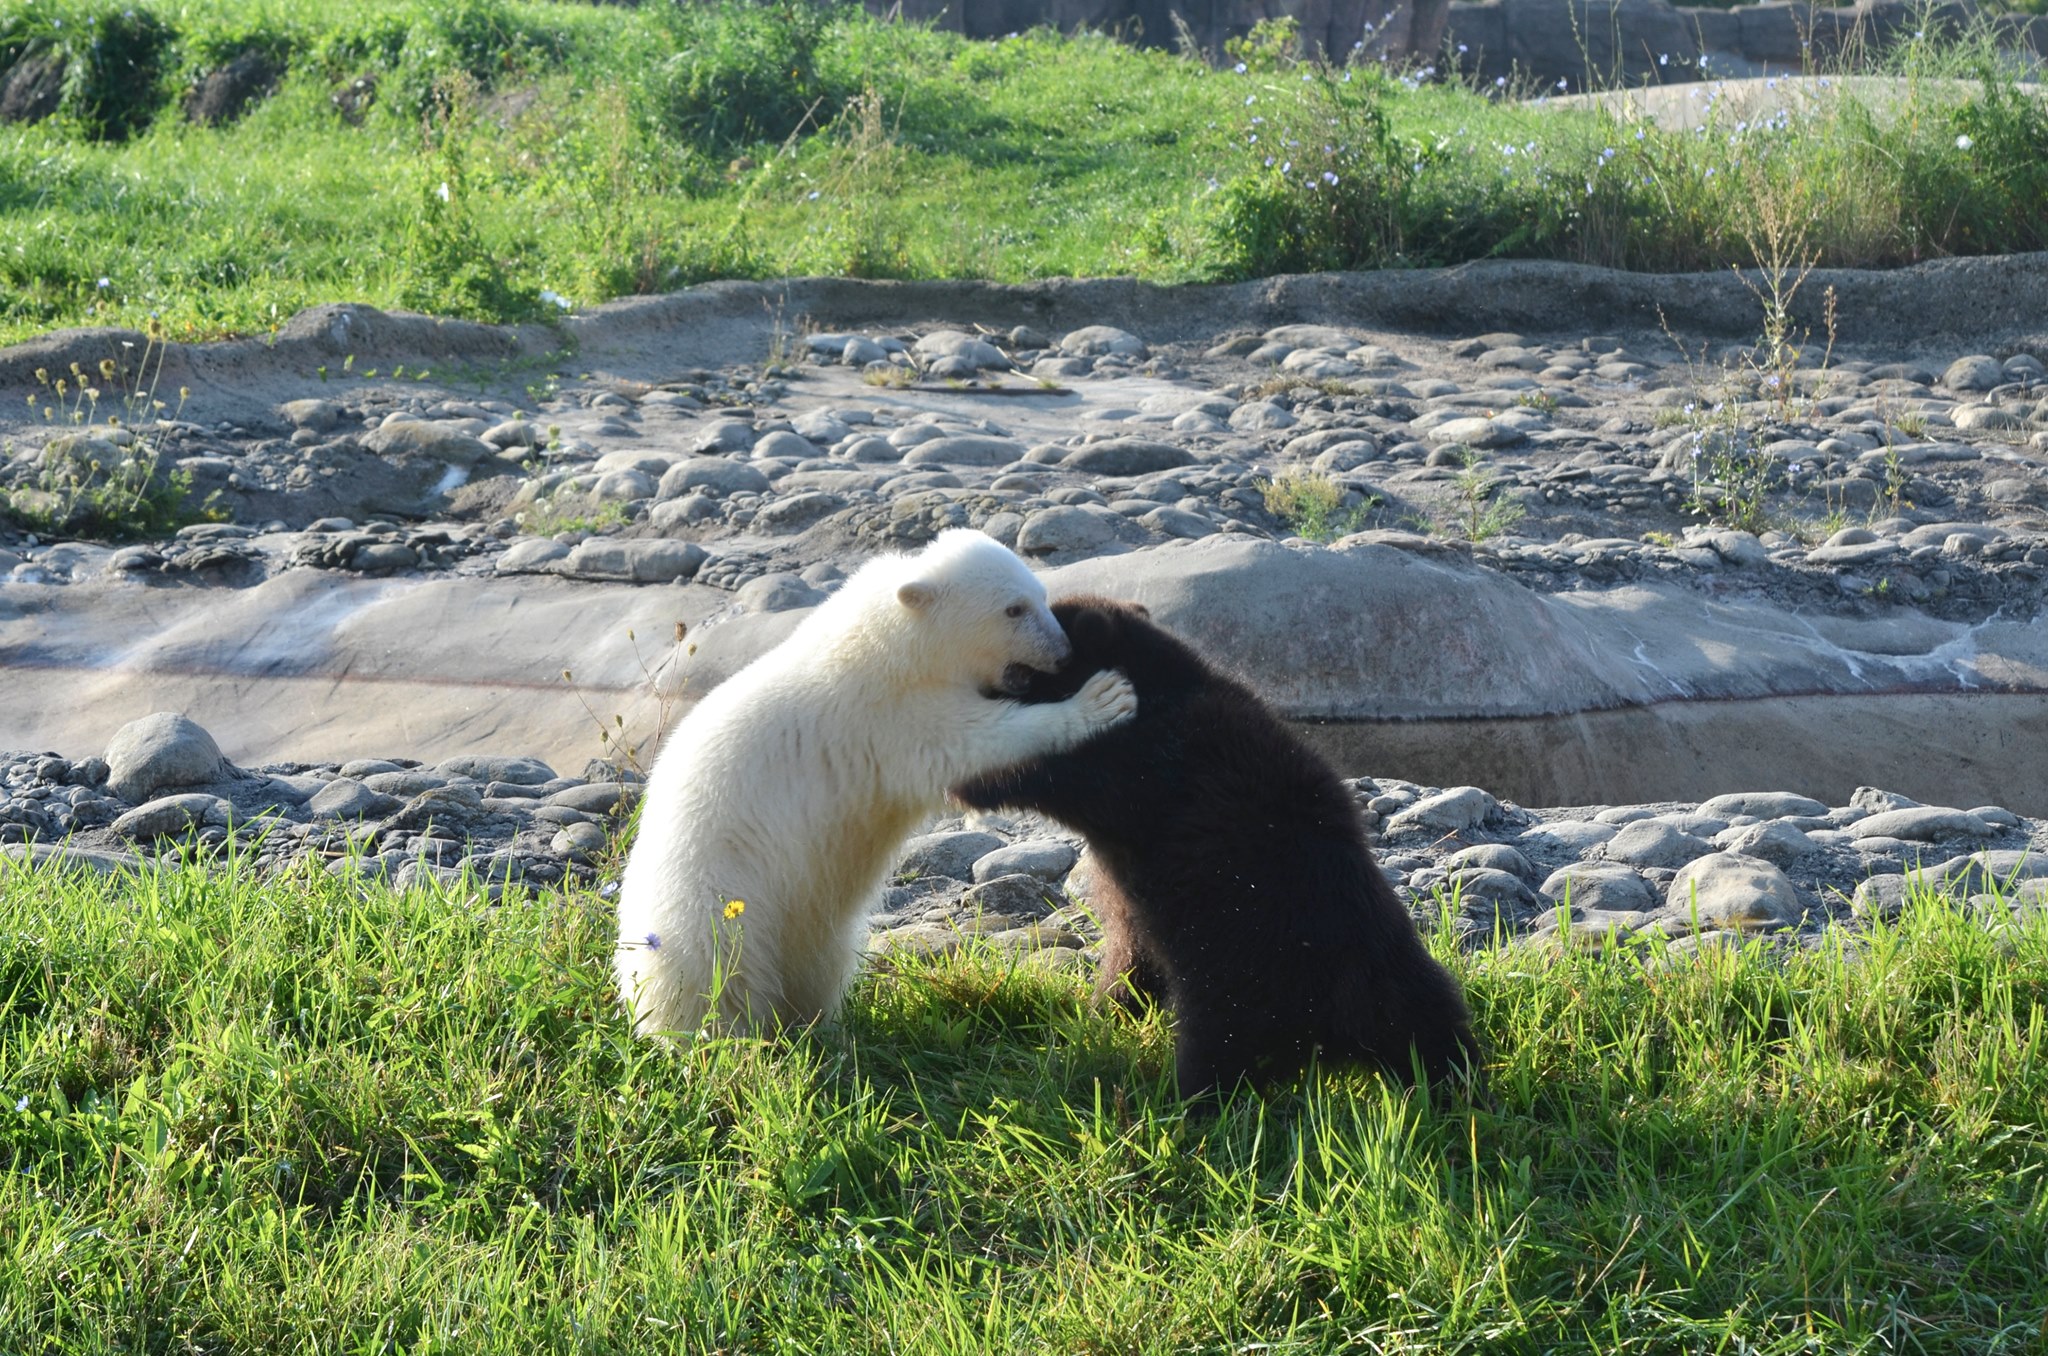 polar bear cub and grizzly bear cub play fighting in a grassy are with a rocky area behind them